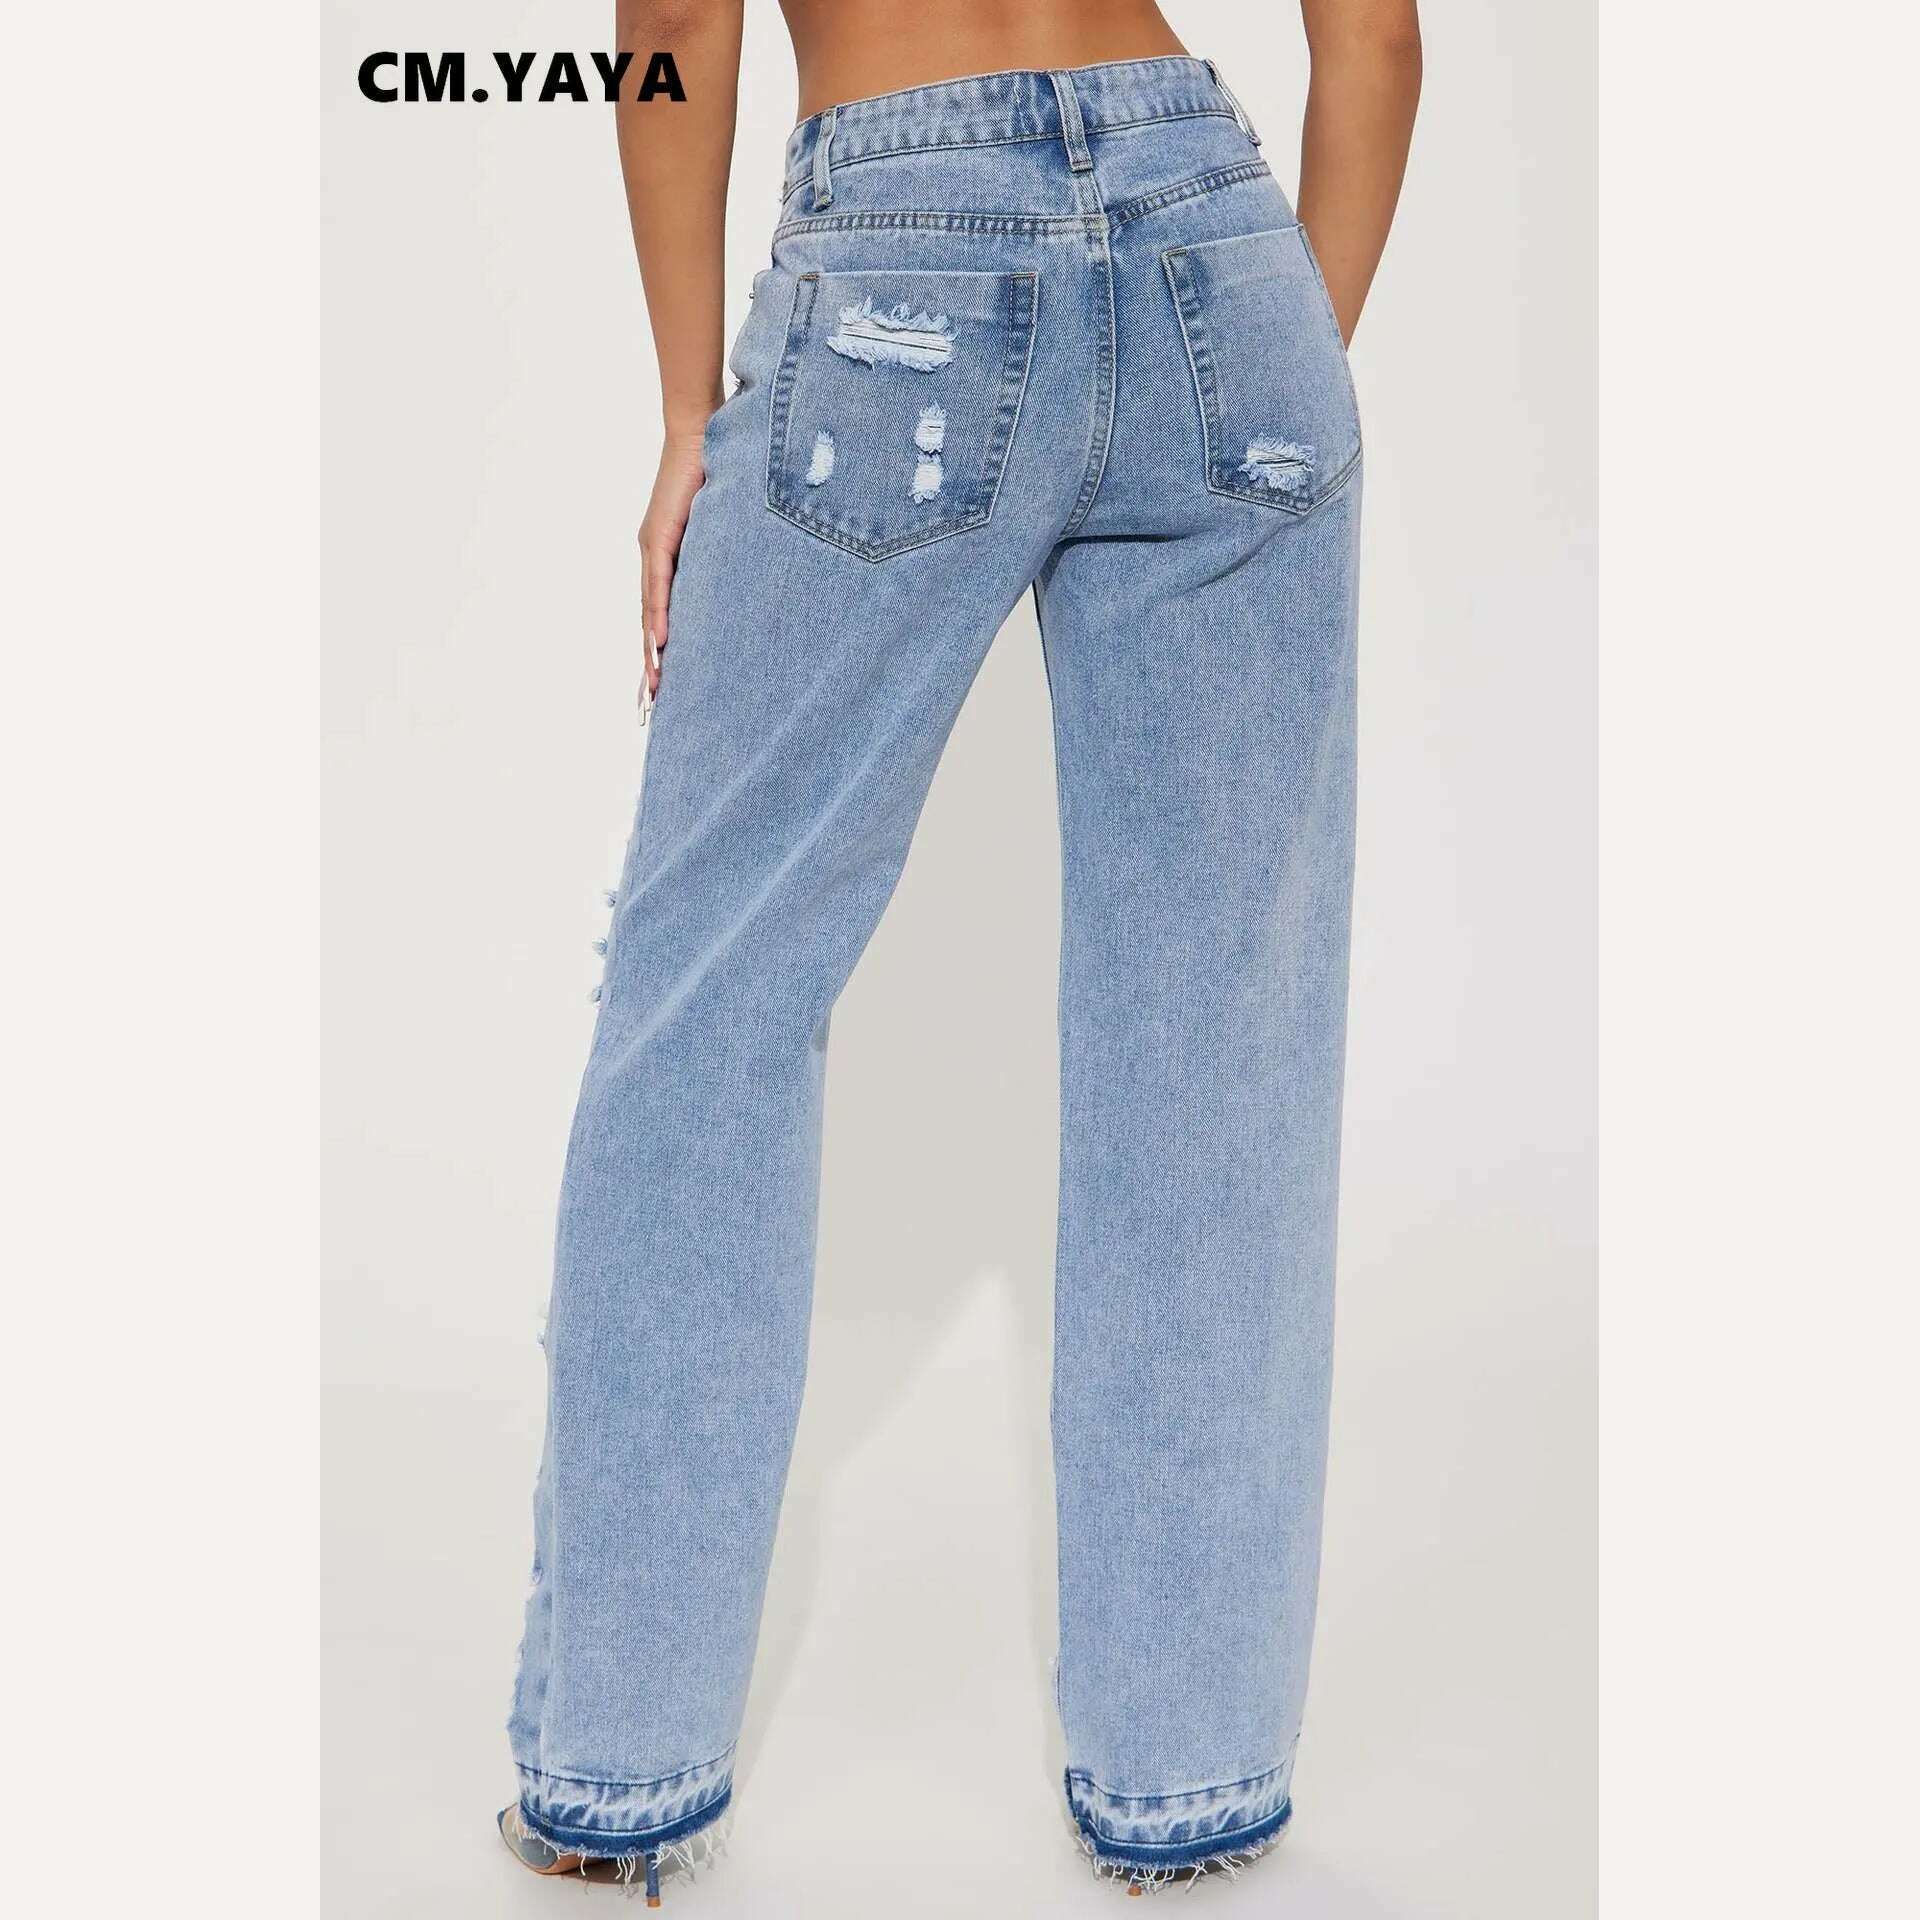 KIMLUD, CM.YAYA Blue Denim Pants for Women 2023 Summer Streetwear Fashion Cutout Ripped Hollow Out Wide Leg Straight Jeans Trousers, KIMLUD Womens Clothes